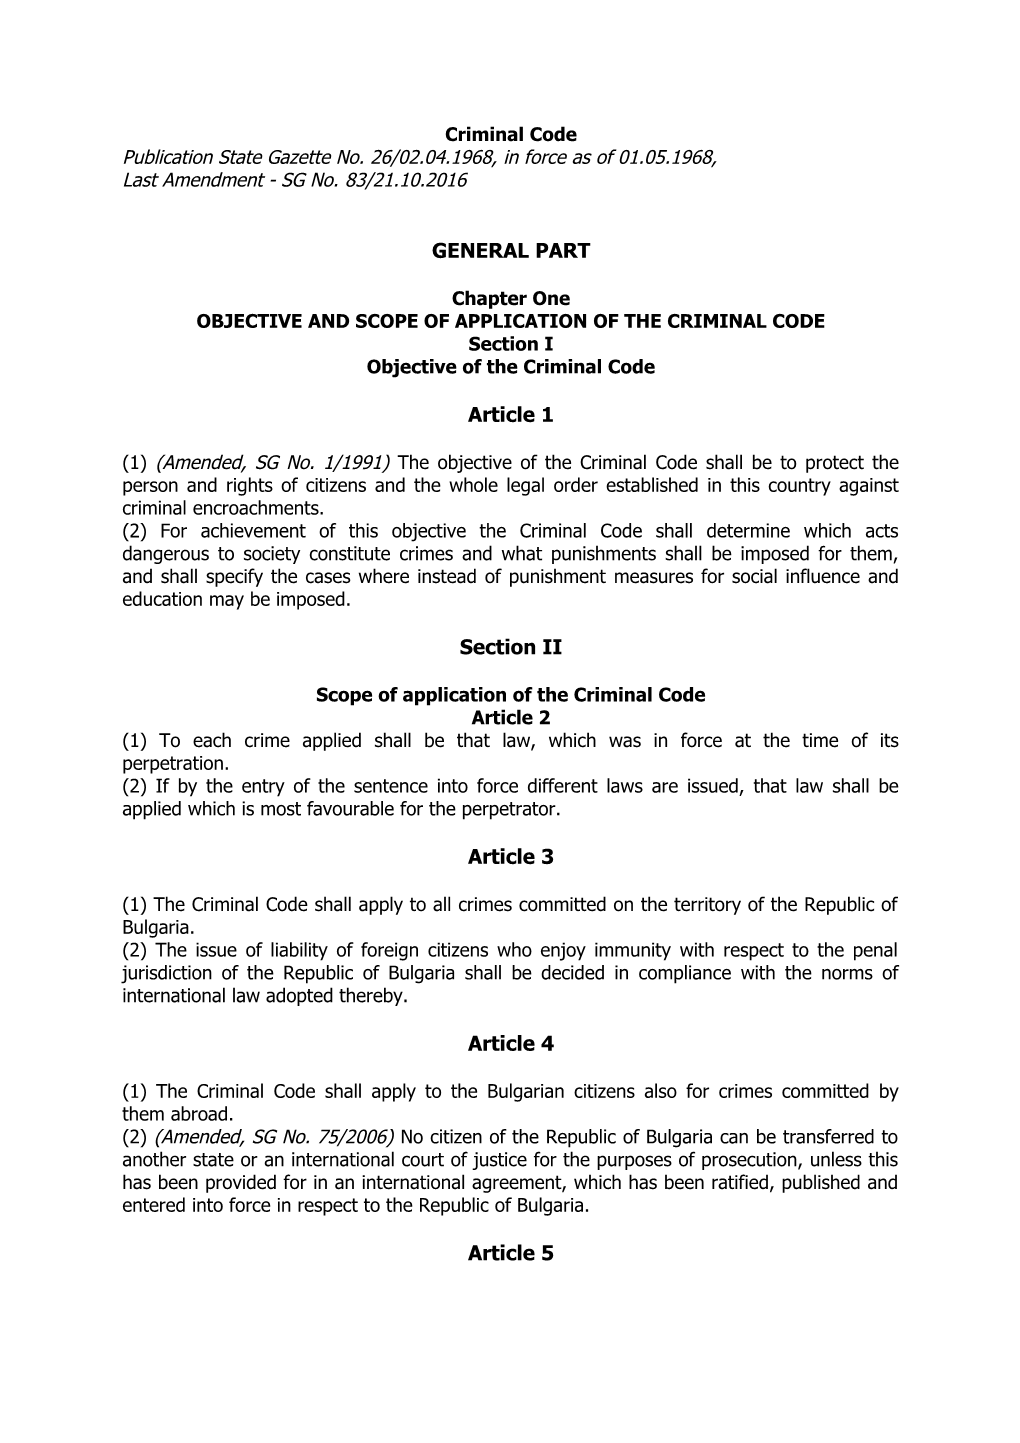 Objective and Scope of Application of the Criminal Code